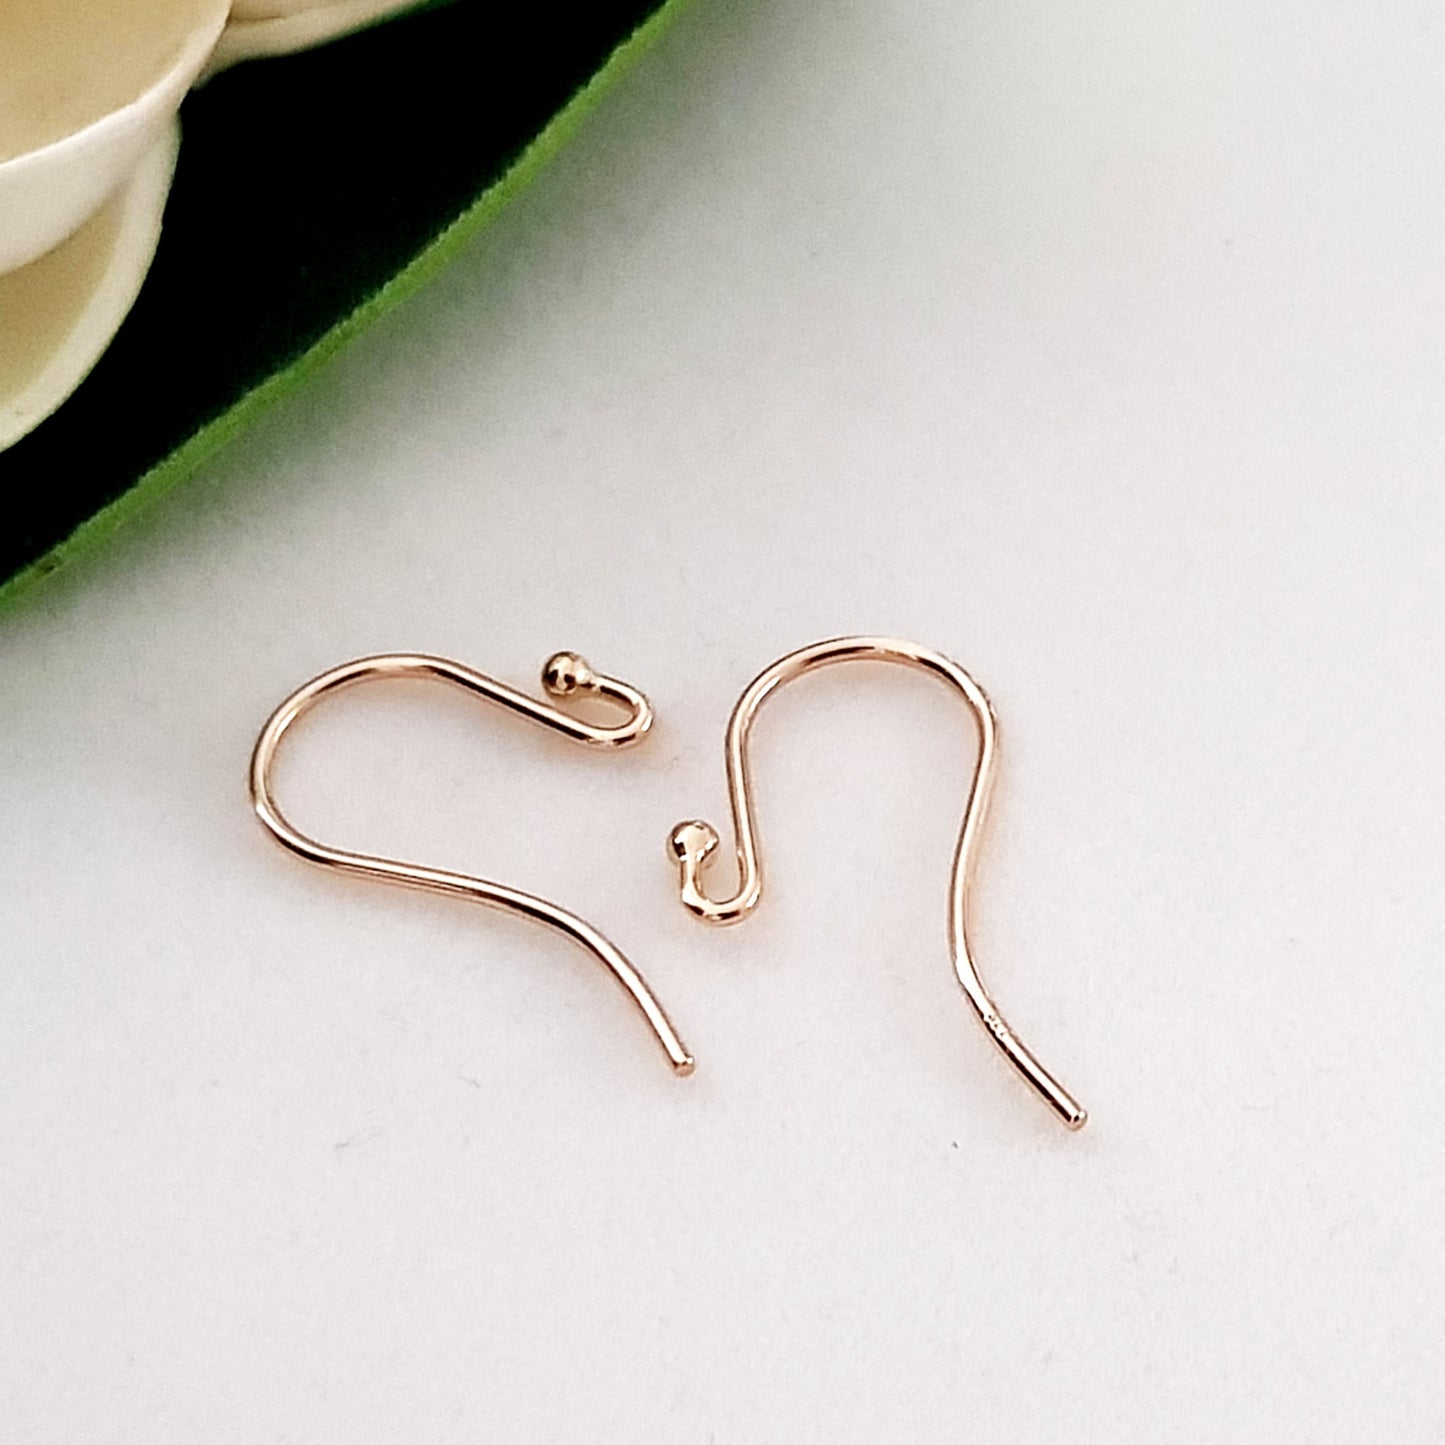 Earring Hooks - Balled Ends Gold-Plated Hooks Quality Findings  | GP-SS-019EH-1 | Earring Findings